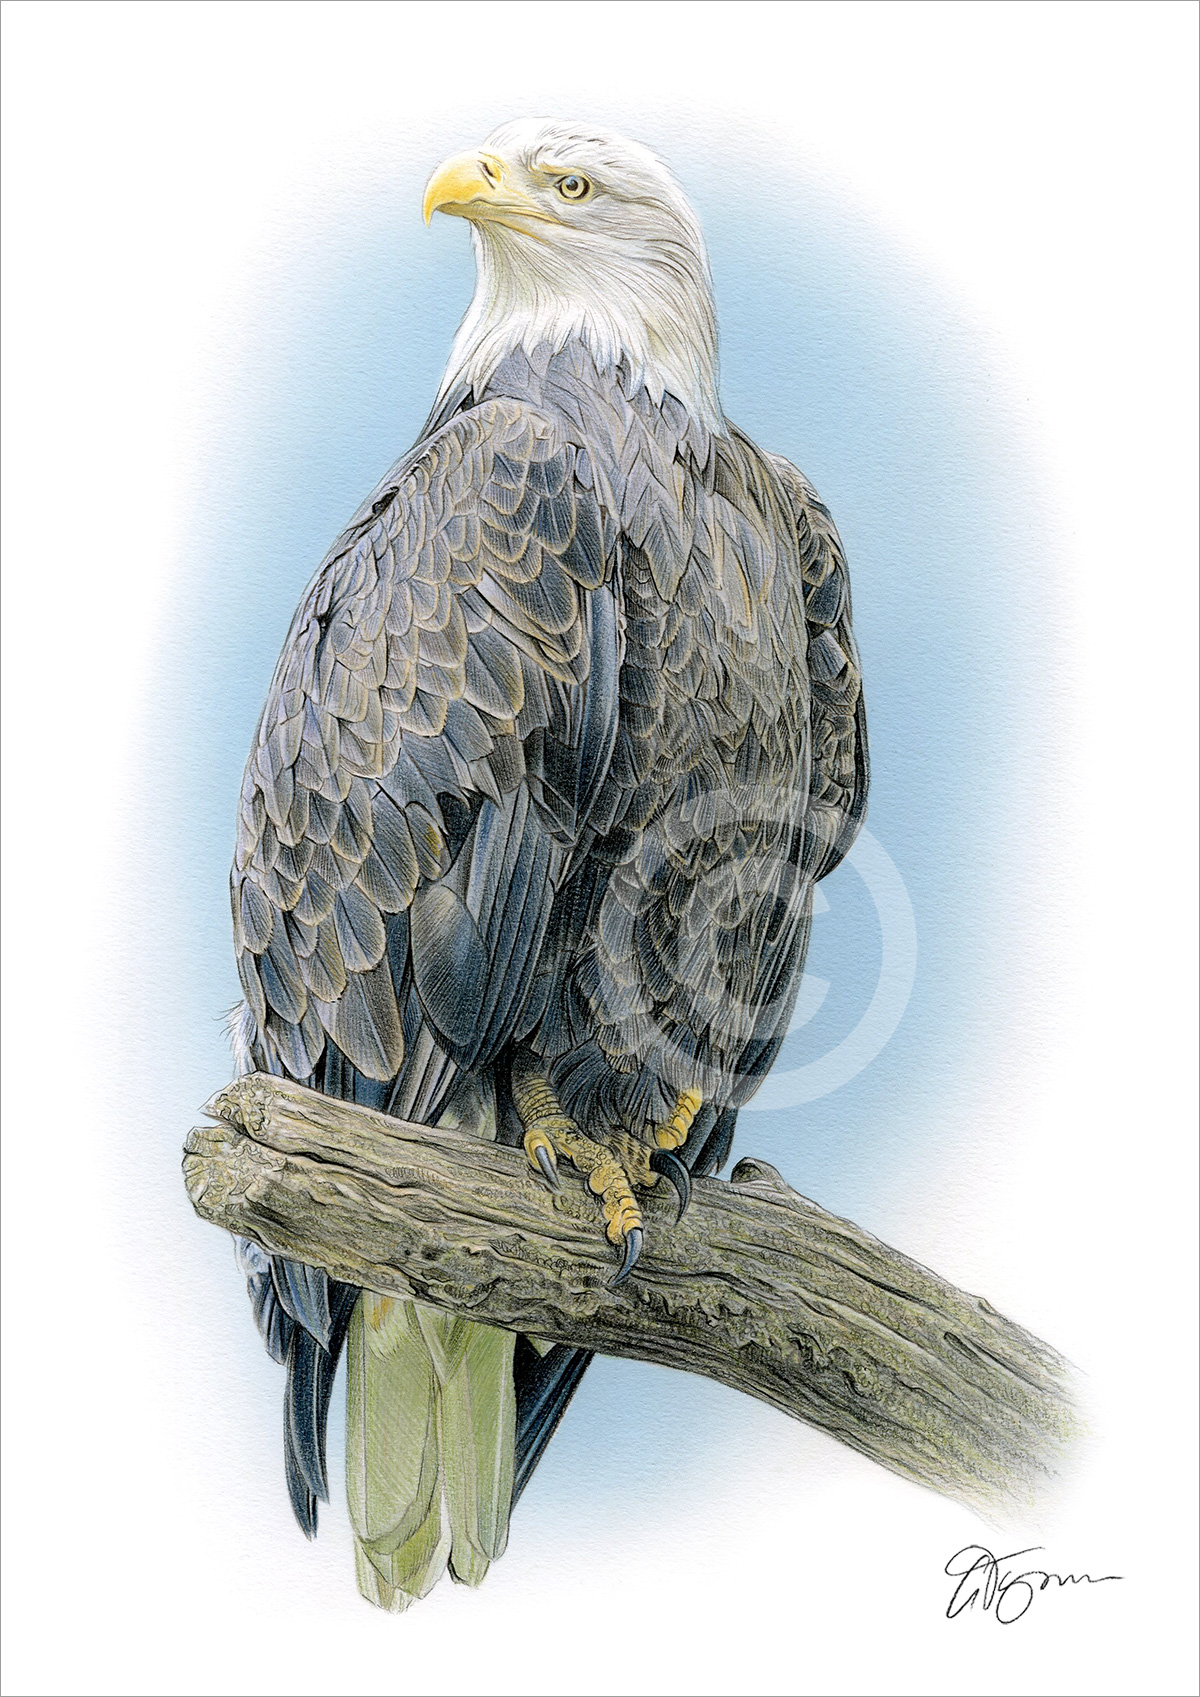 Colour pencil drawing of a bald eagle on a branch by artist Gary Tymon